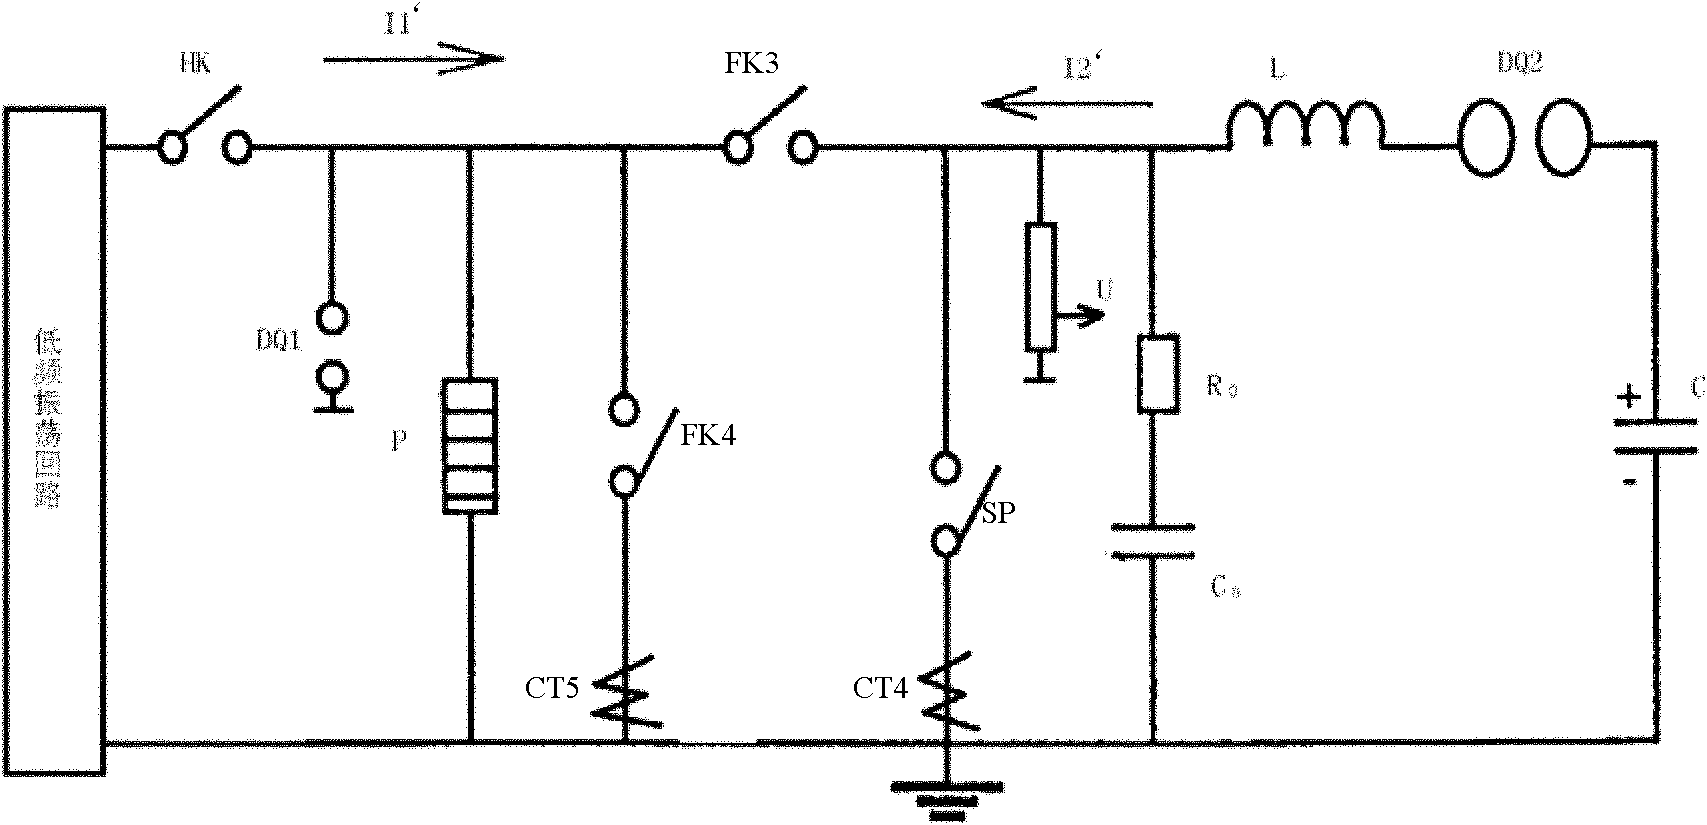 Test loop used for direct-current switch test